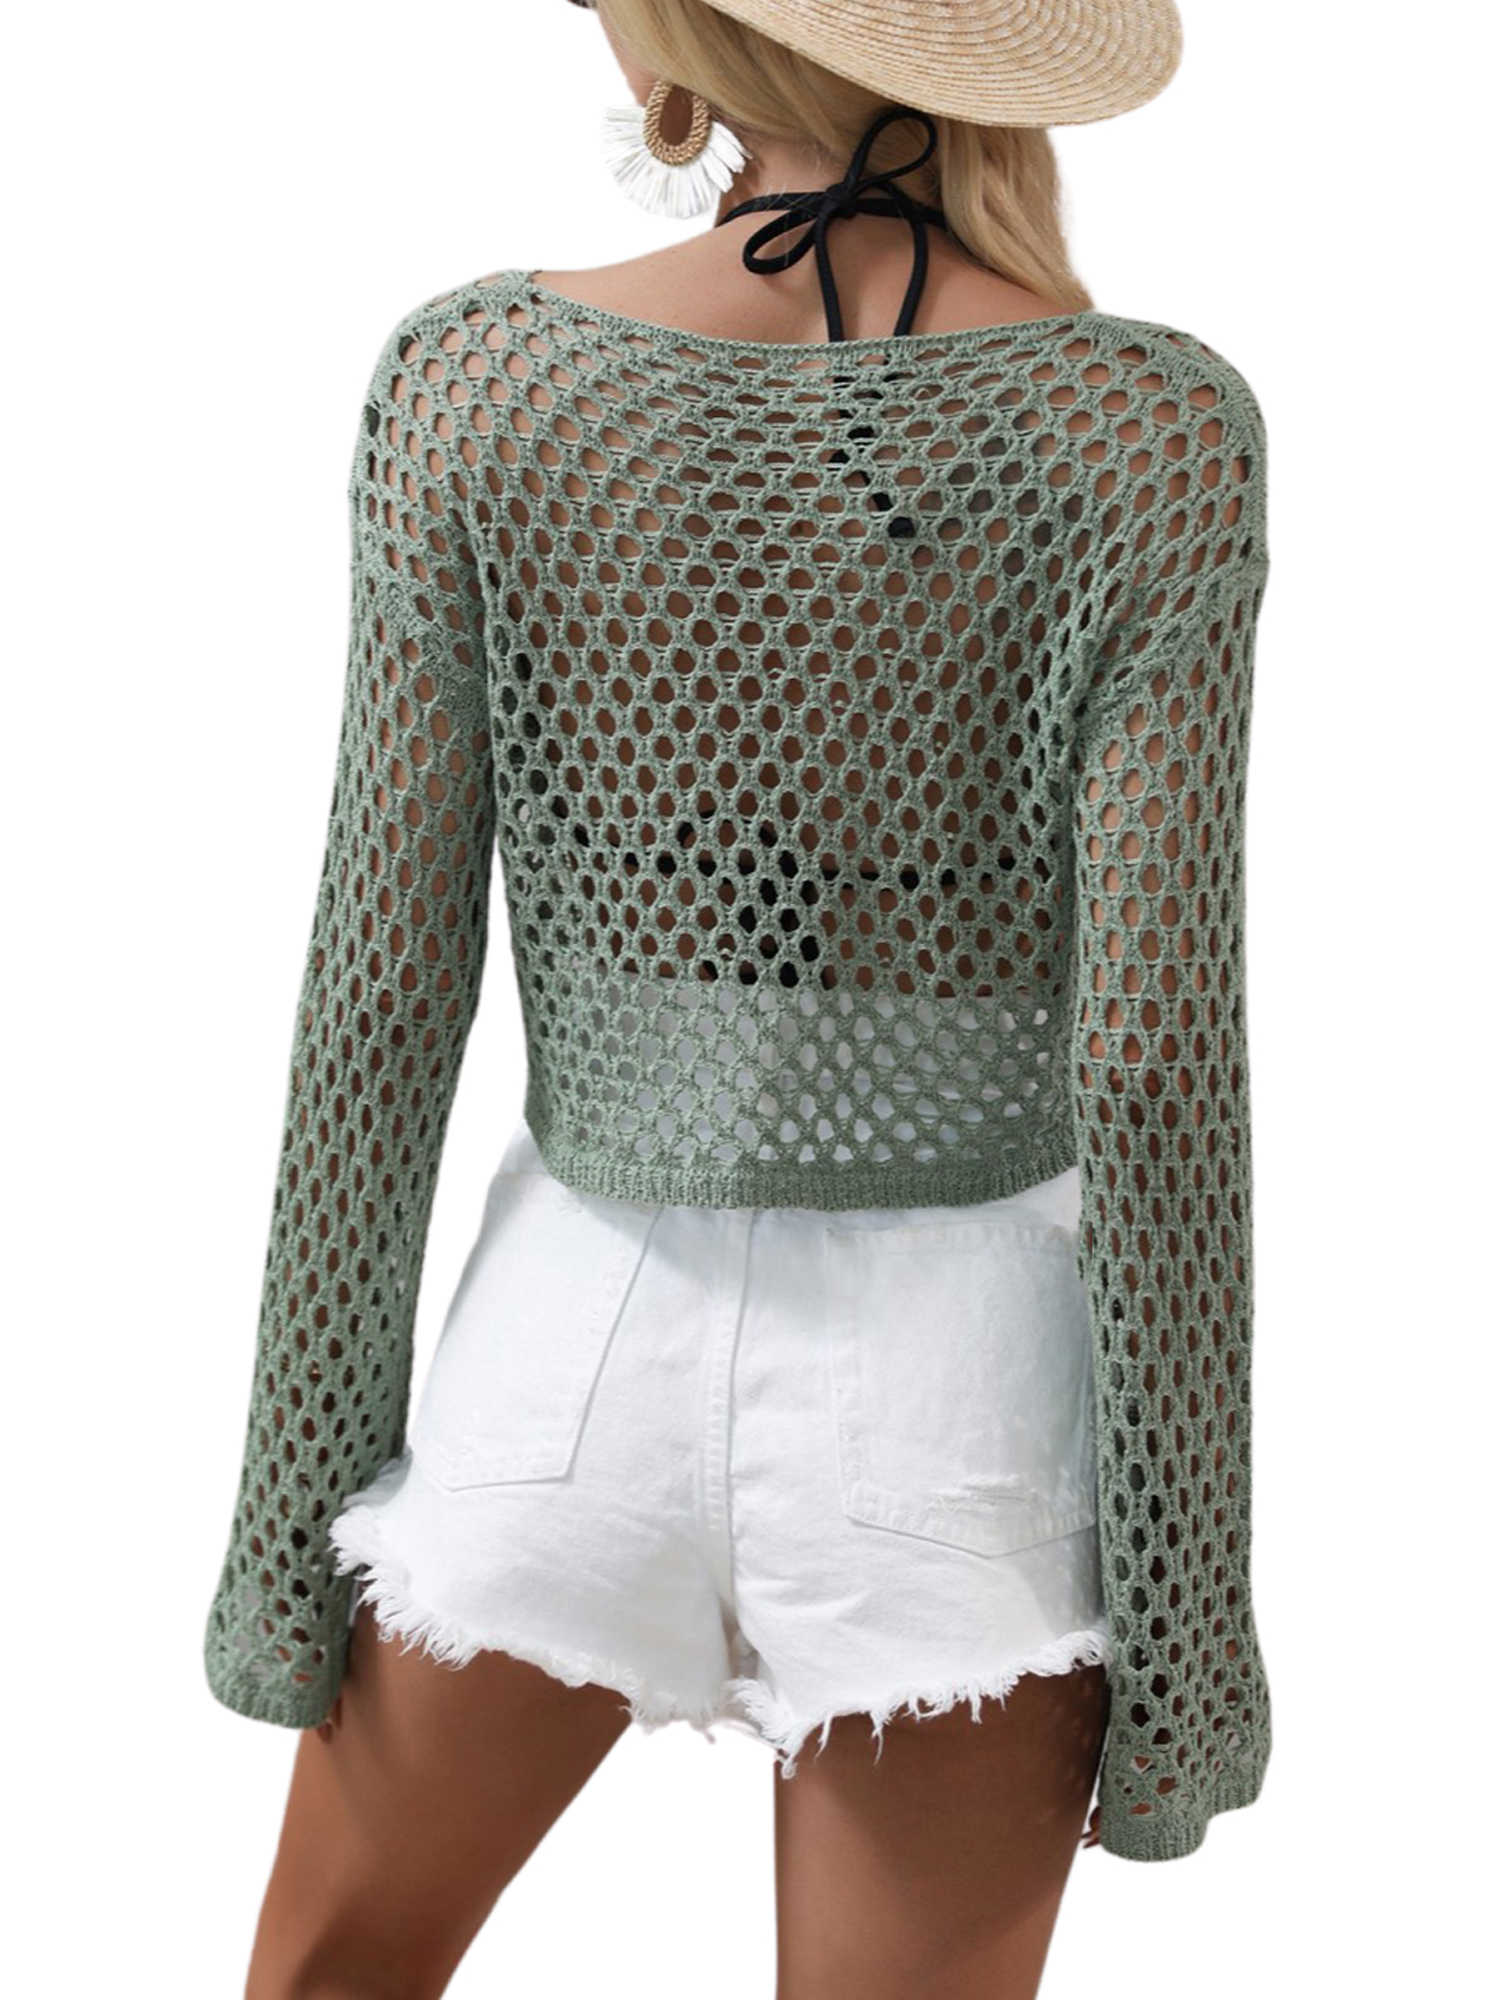 Licupiee Women Sexy Crochet Hollow Out Crop Top Mesh See-Through Long Sleeve Shirt Knitted Pullover Cover Up Tee - image 5 of 6